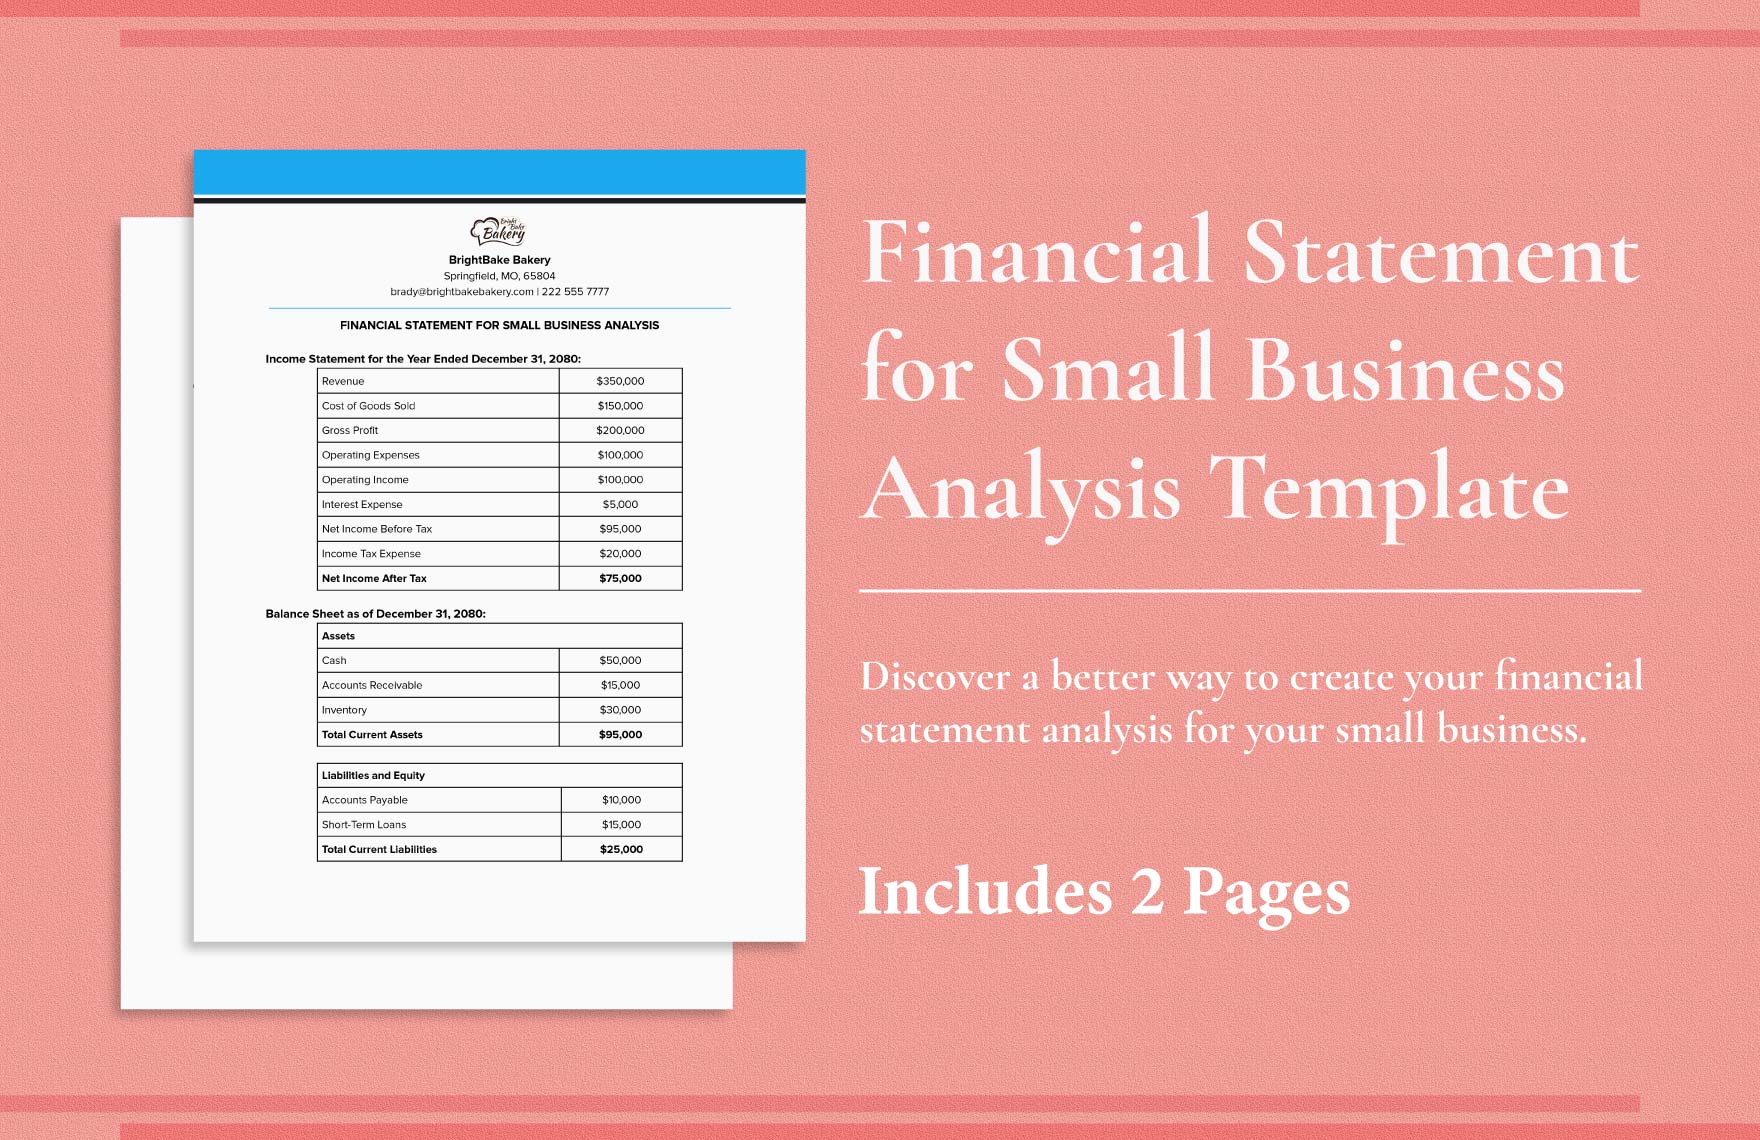 Financial Statement for Small Business Analysis Template